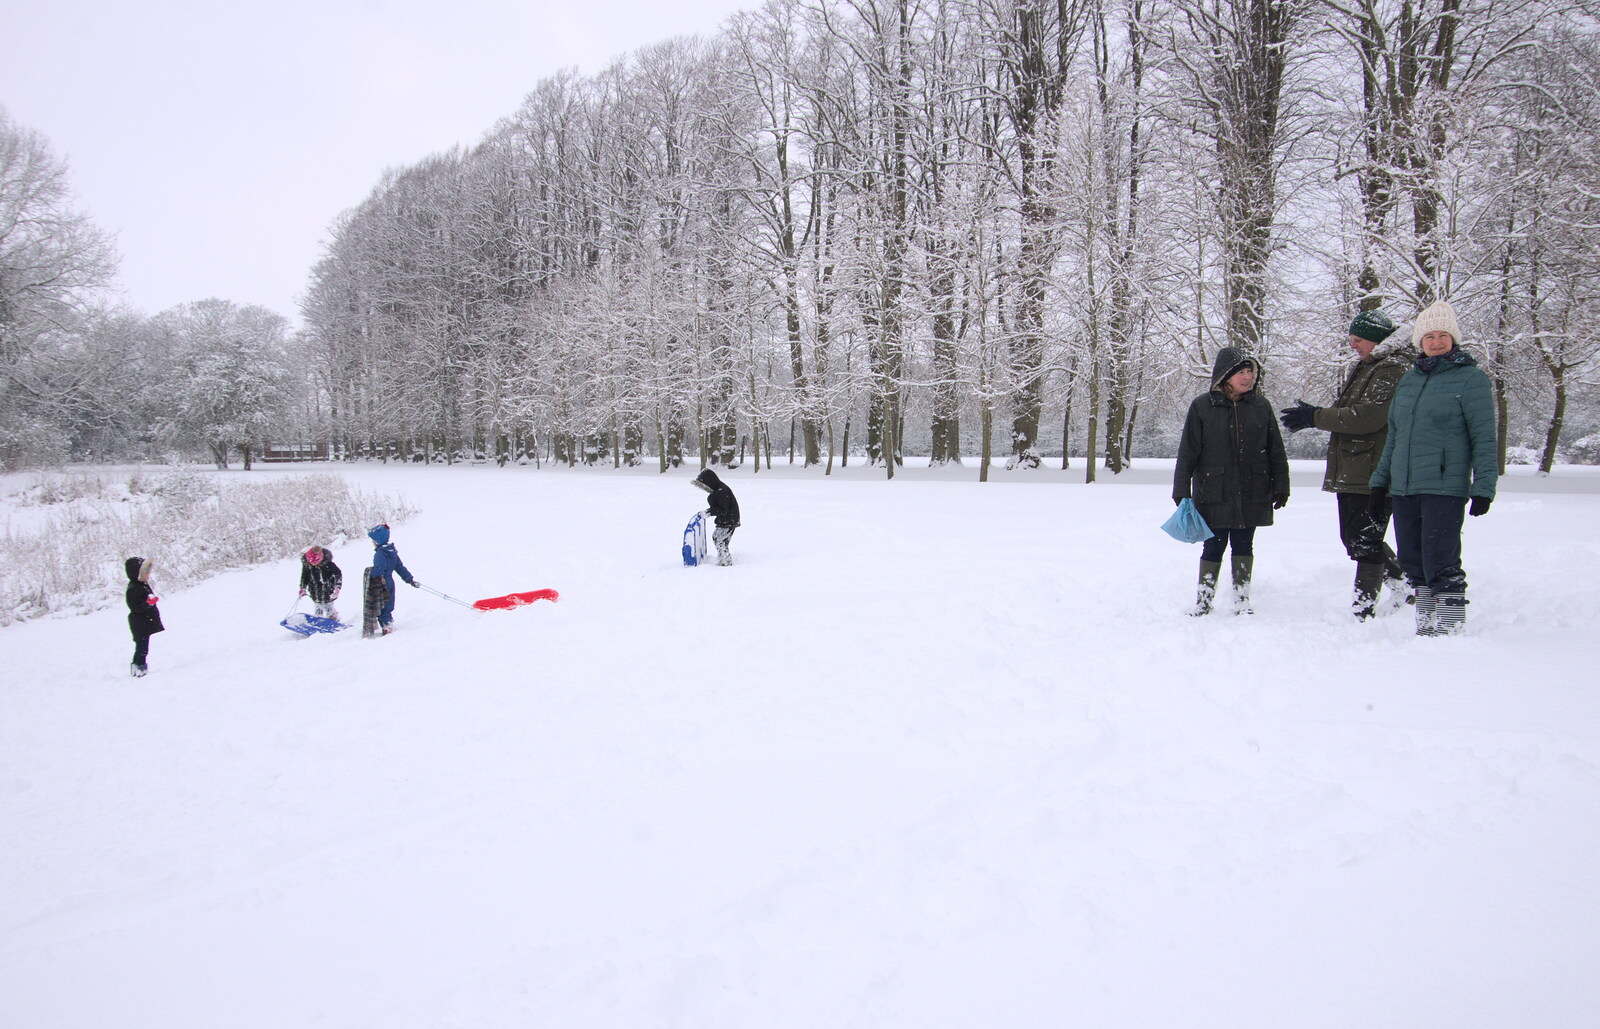 There's a spot of sledging near lunchtime from The Beast From the East: Snow Days, Brome, Suffolk - 28th February 2018